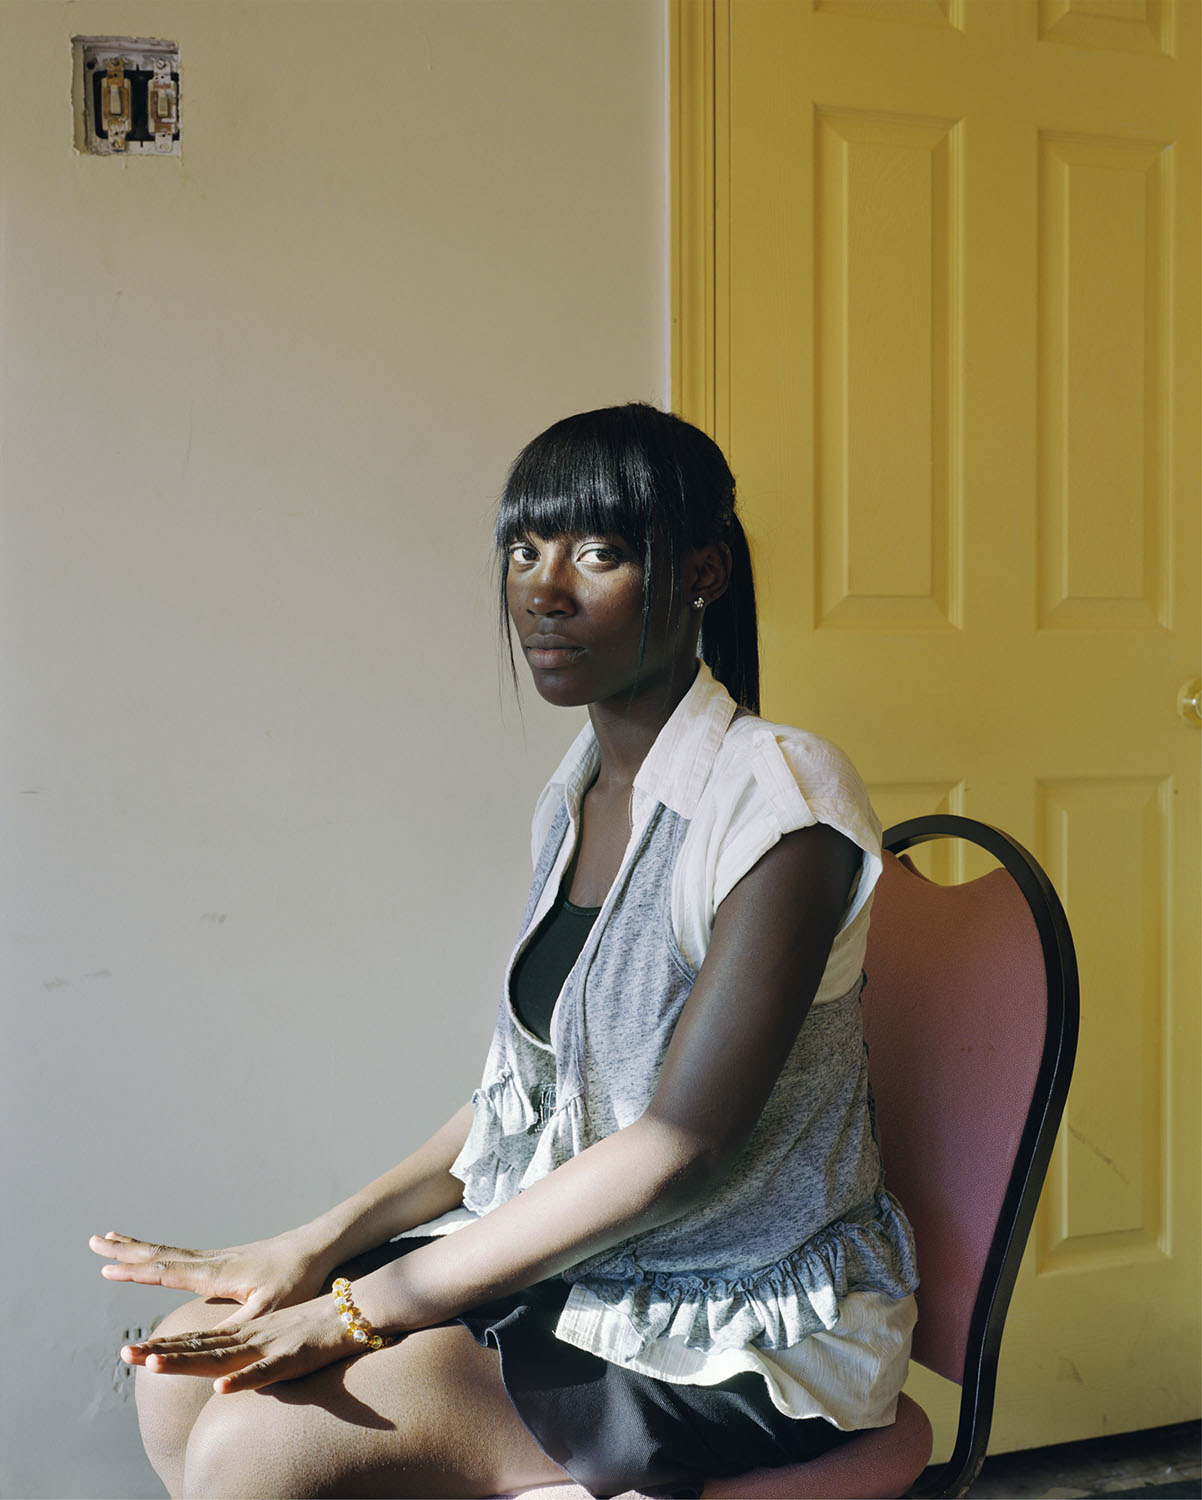 Paul D’Amato, Lillian, 2011. Pigment print. Courtesy of the artist and Stephen Daiter Gallery, Chicago